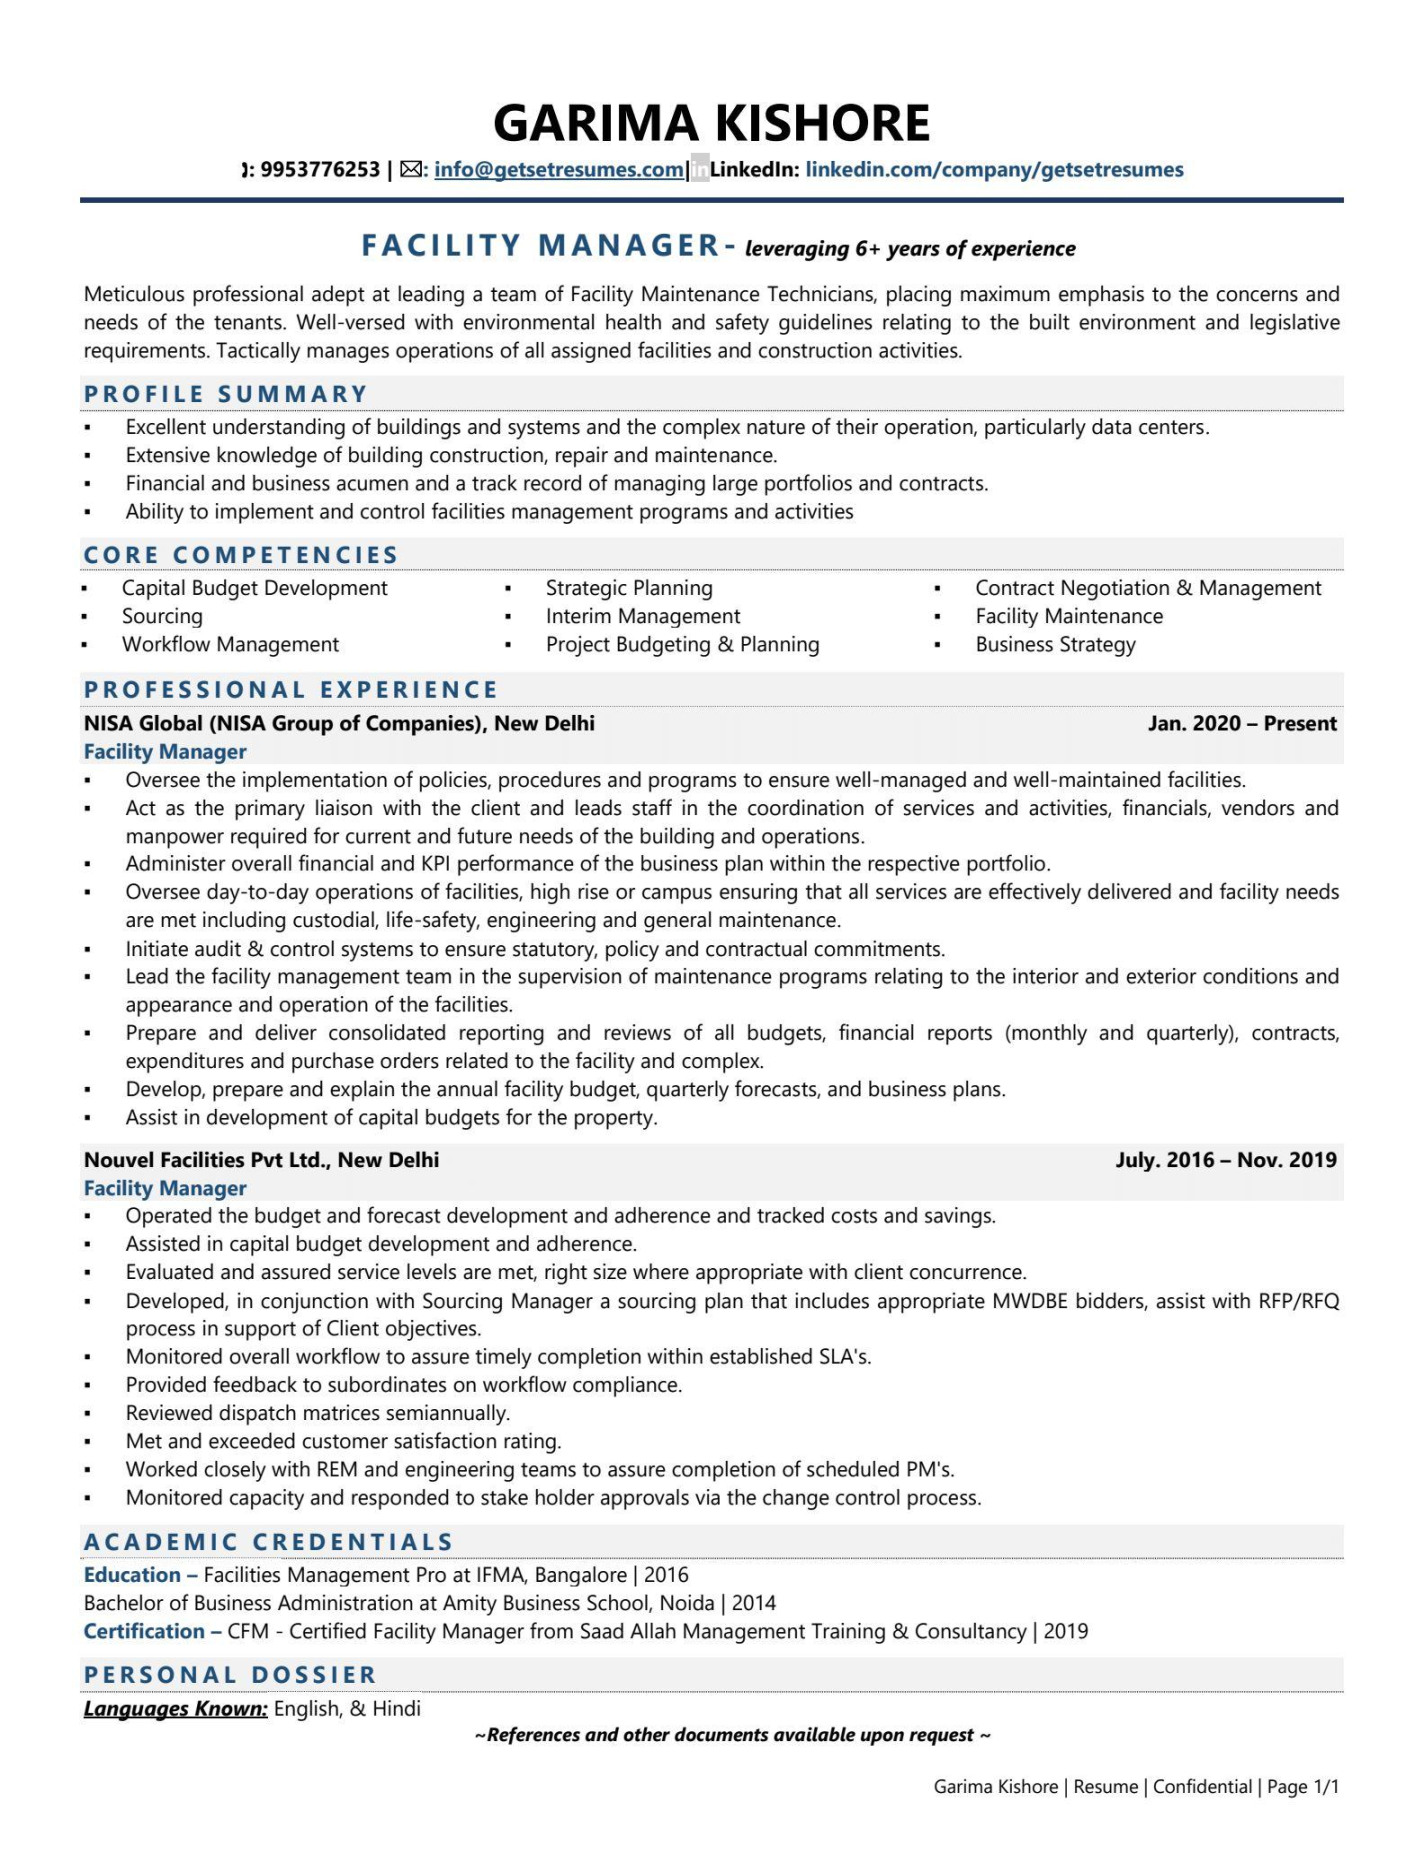 Facility Manager Resume Examples & Template (with job winning tips)